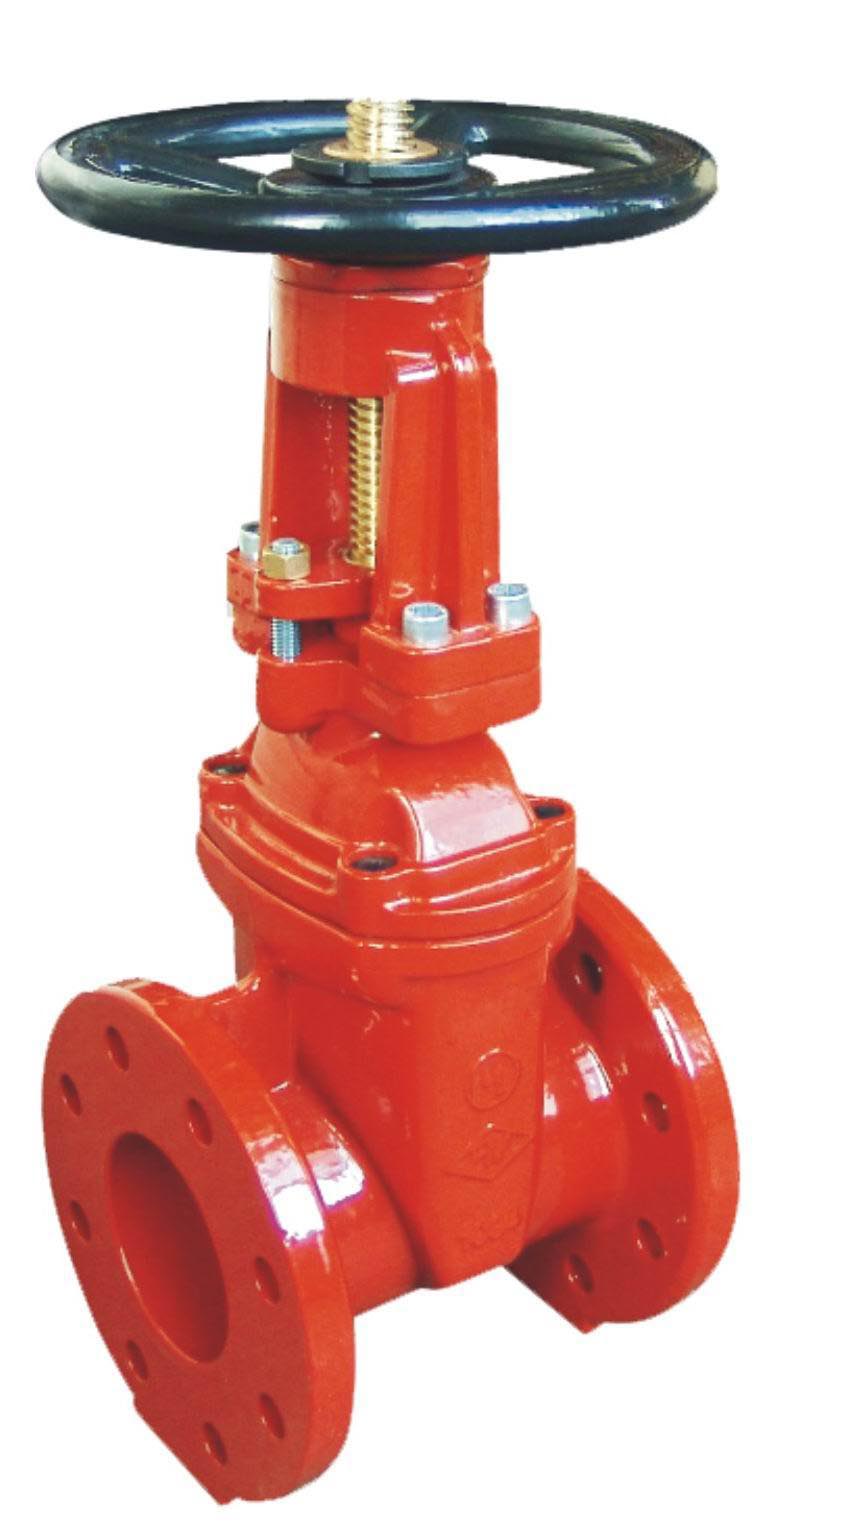 Flanged Ends OSY Resilient Seated Gate Valves-AWWA C509-UL FM Approval